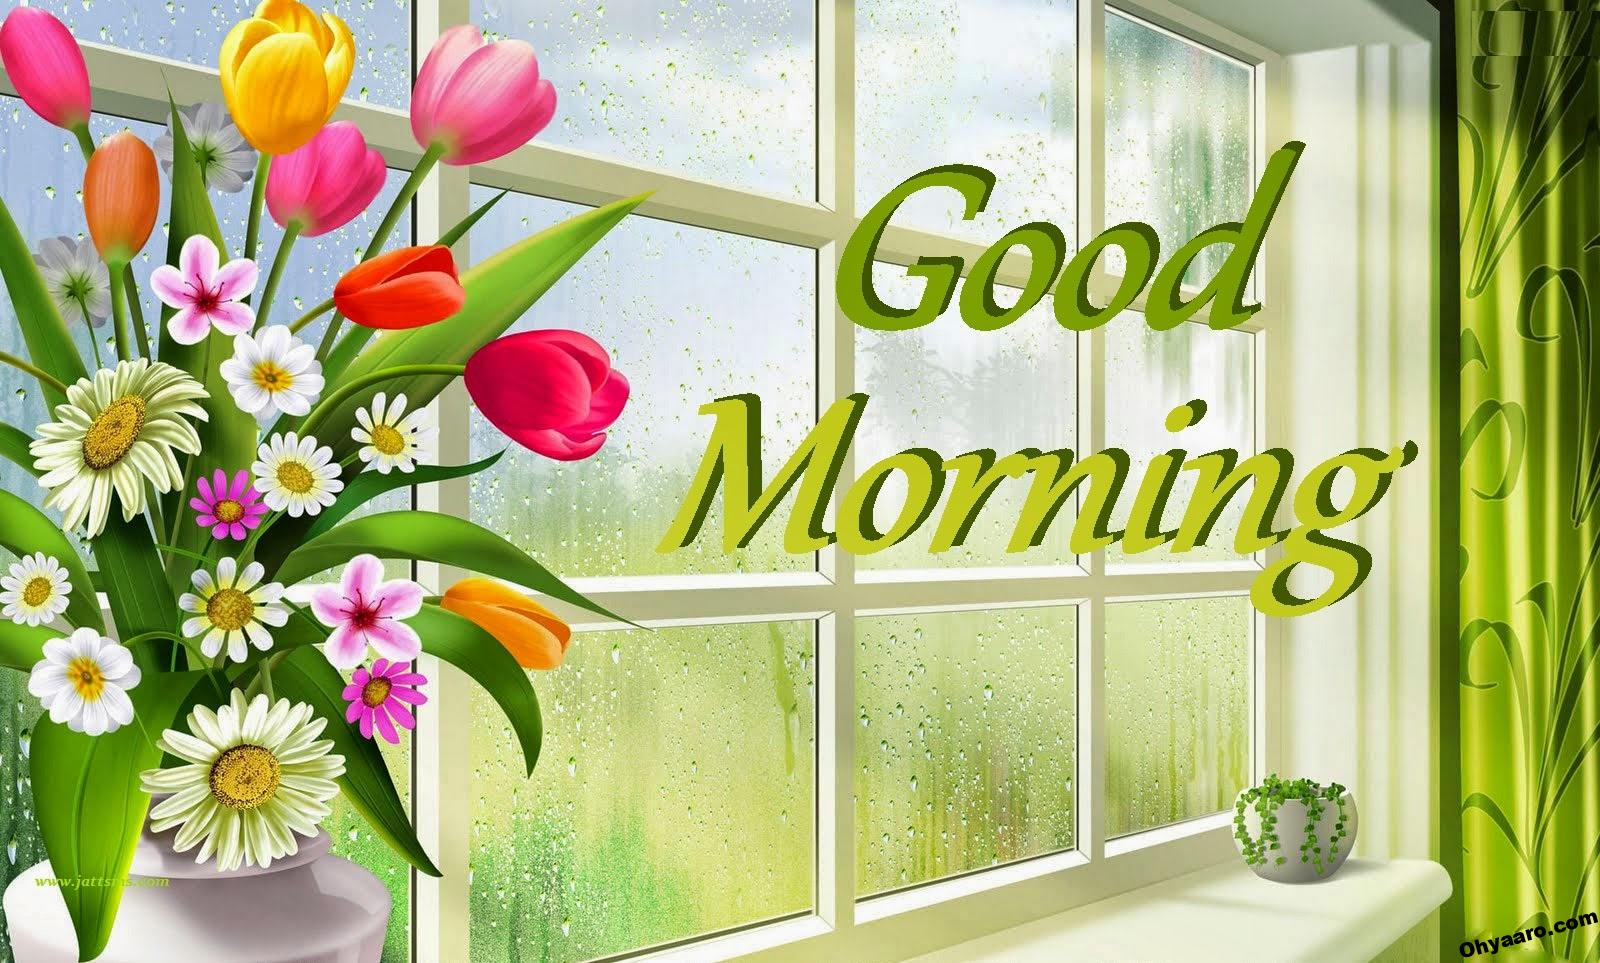 Download Good Morning Wallpaper for WhatsApp